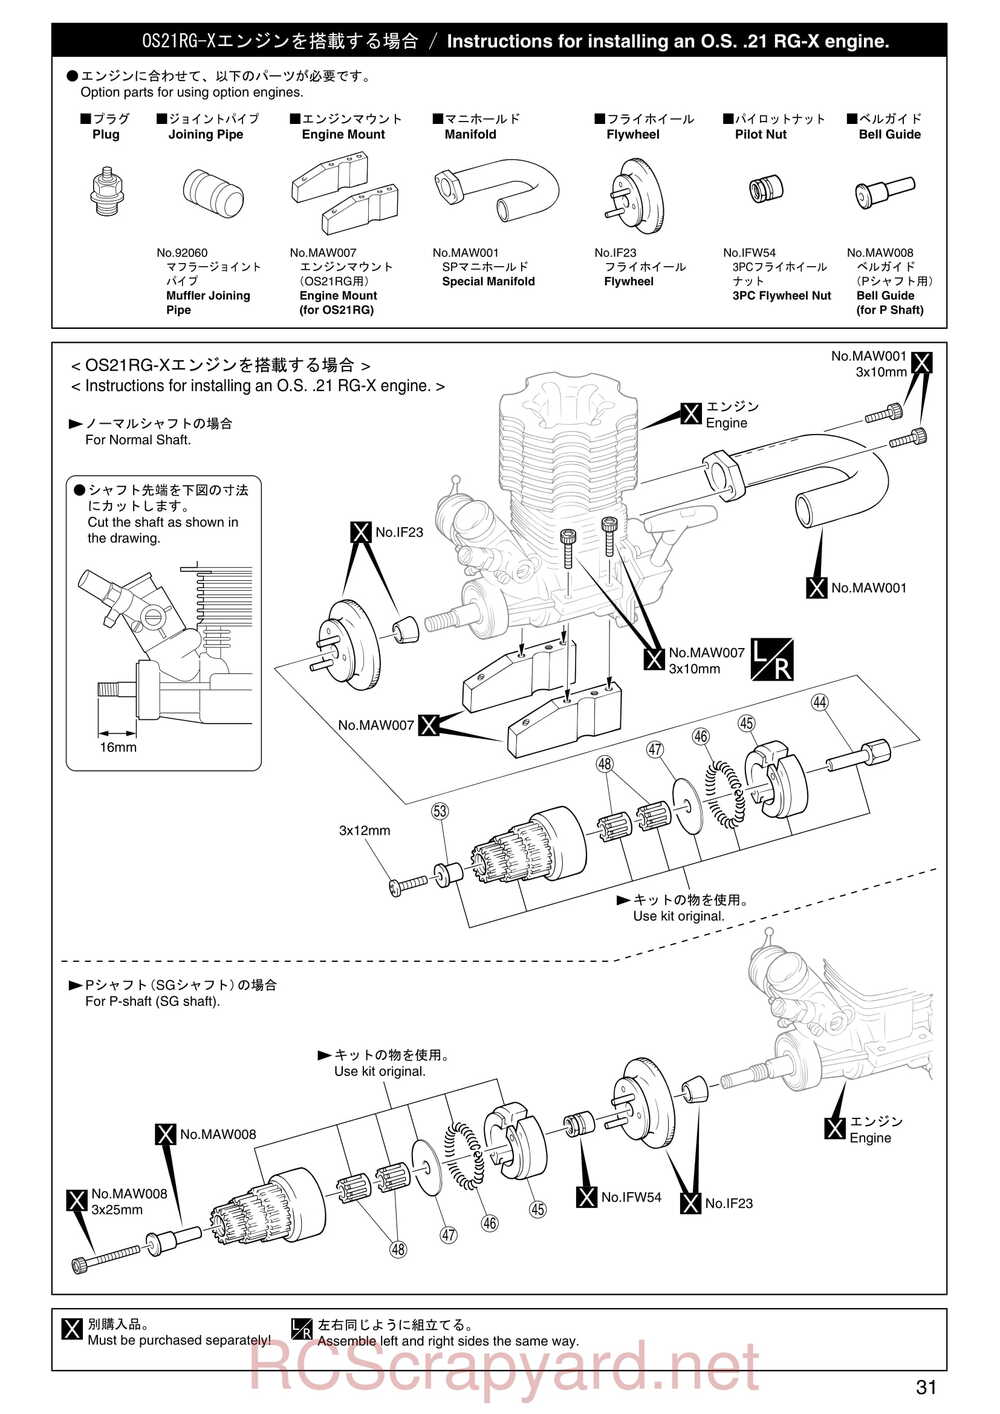 Kyosho - 31224 - Mad-Armour - Manual - Page 31